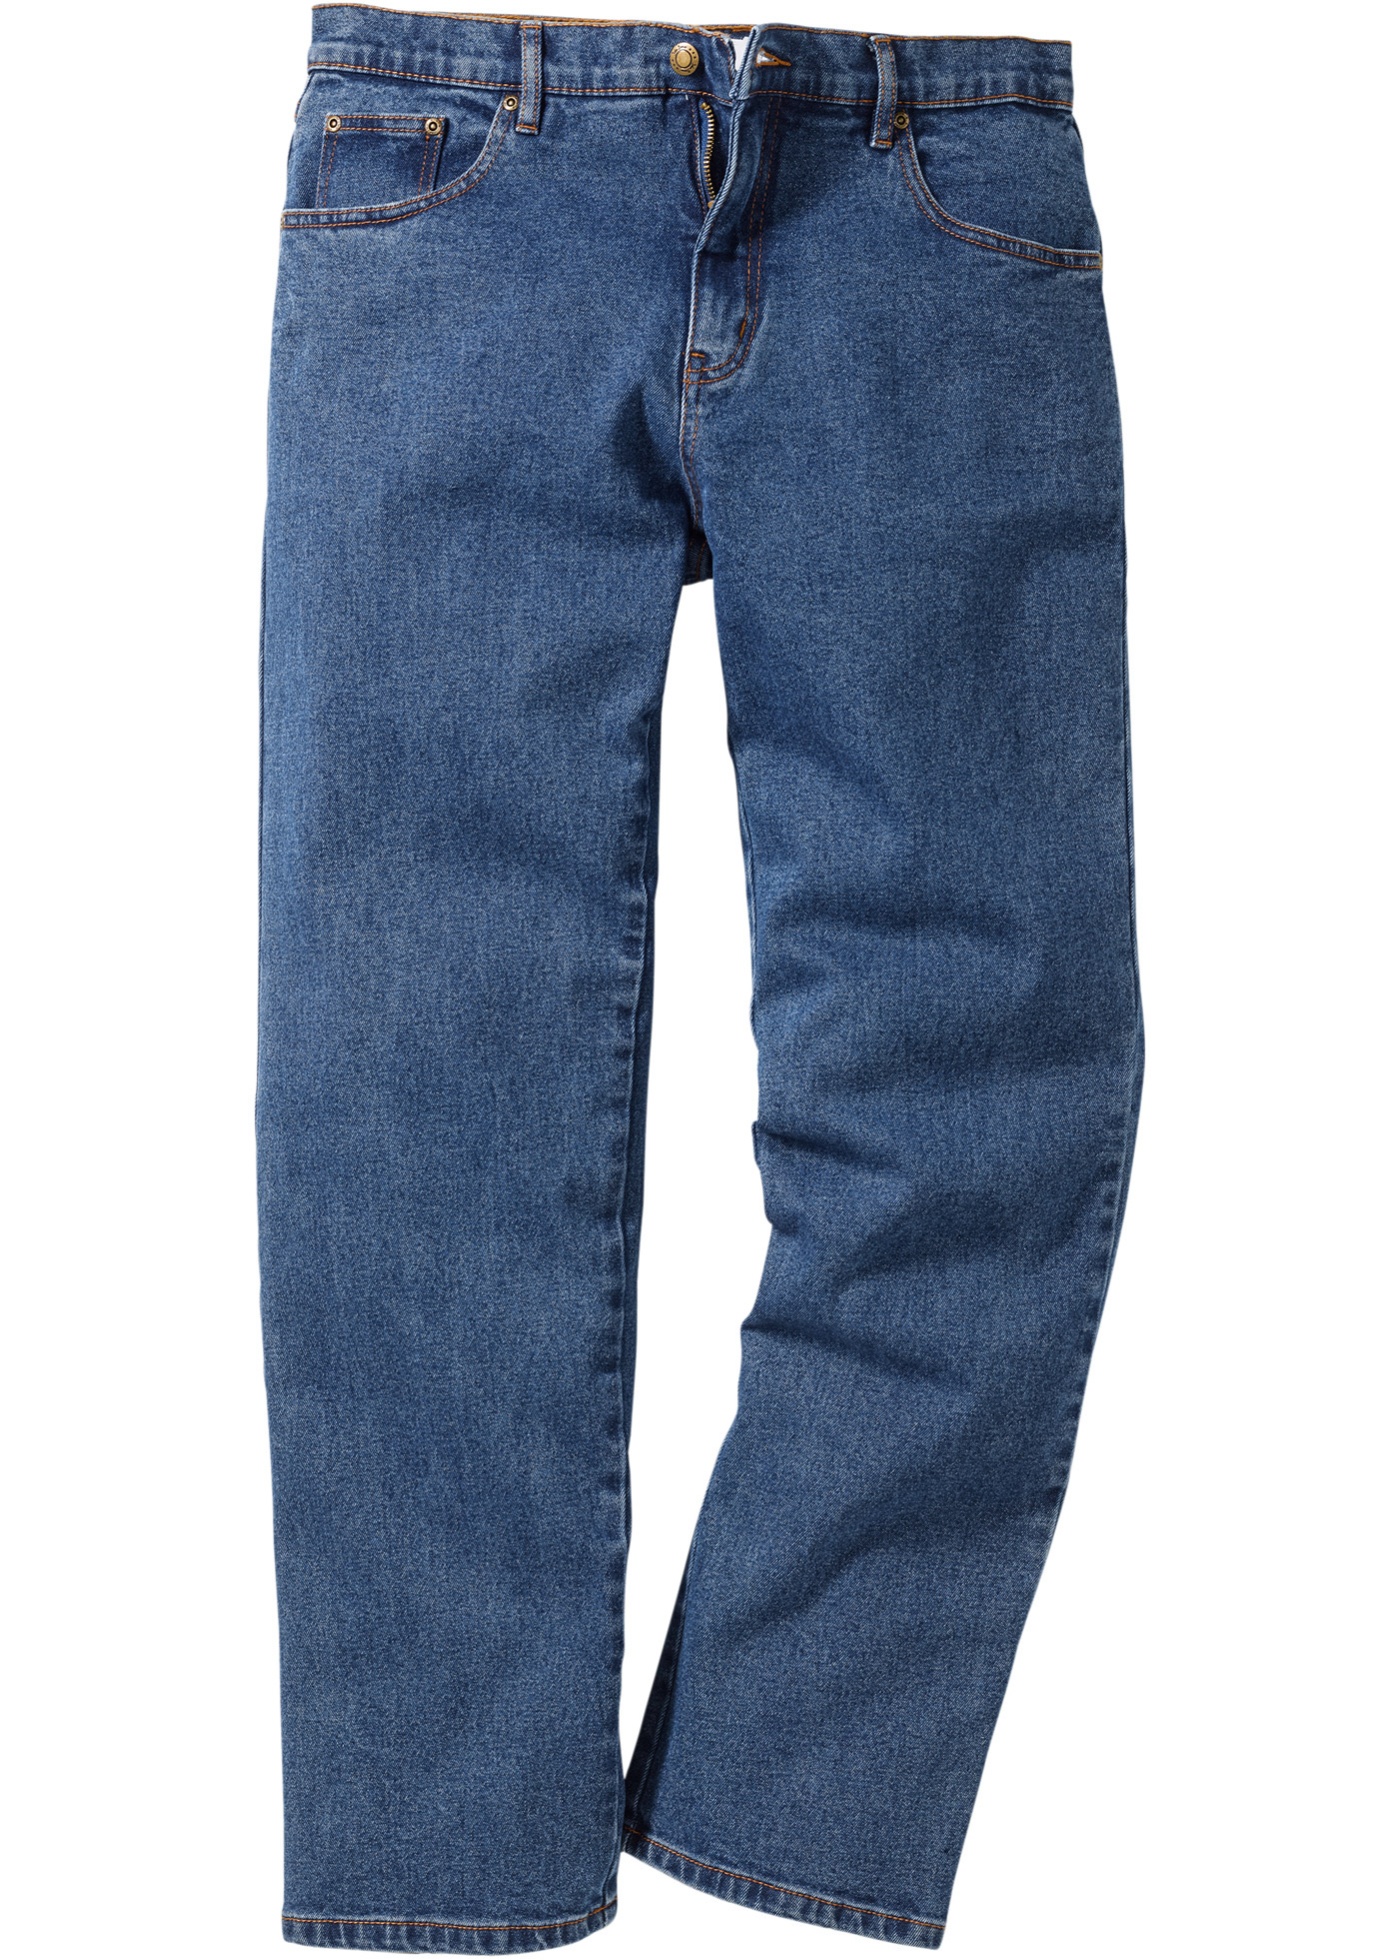 Classic fit stretch jeans, straight